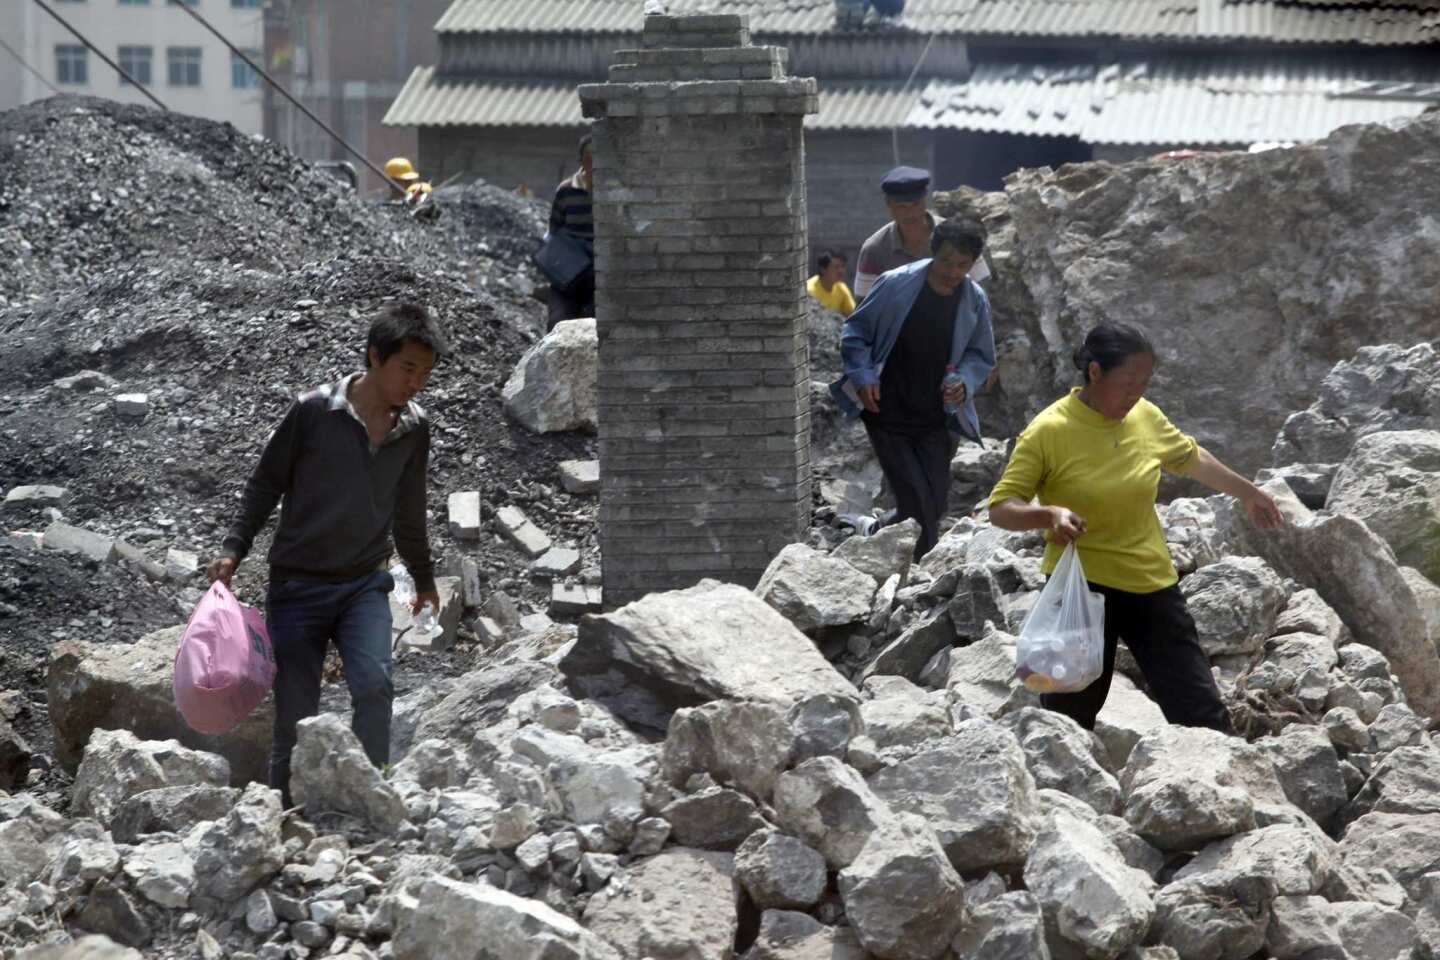 Survivors sift through the remains of a collapsed home in Yiliang in a remote and mountainous area of southwest China. Witnesses said residents ran screaming from their homes and business as two quakes hit on the border of Yunnan and Guizhou provinces an hour apart, followed by a string of aftershocks.